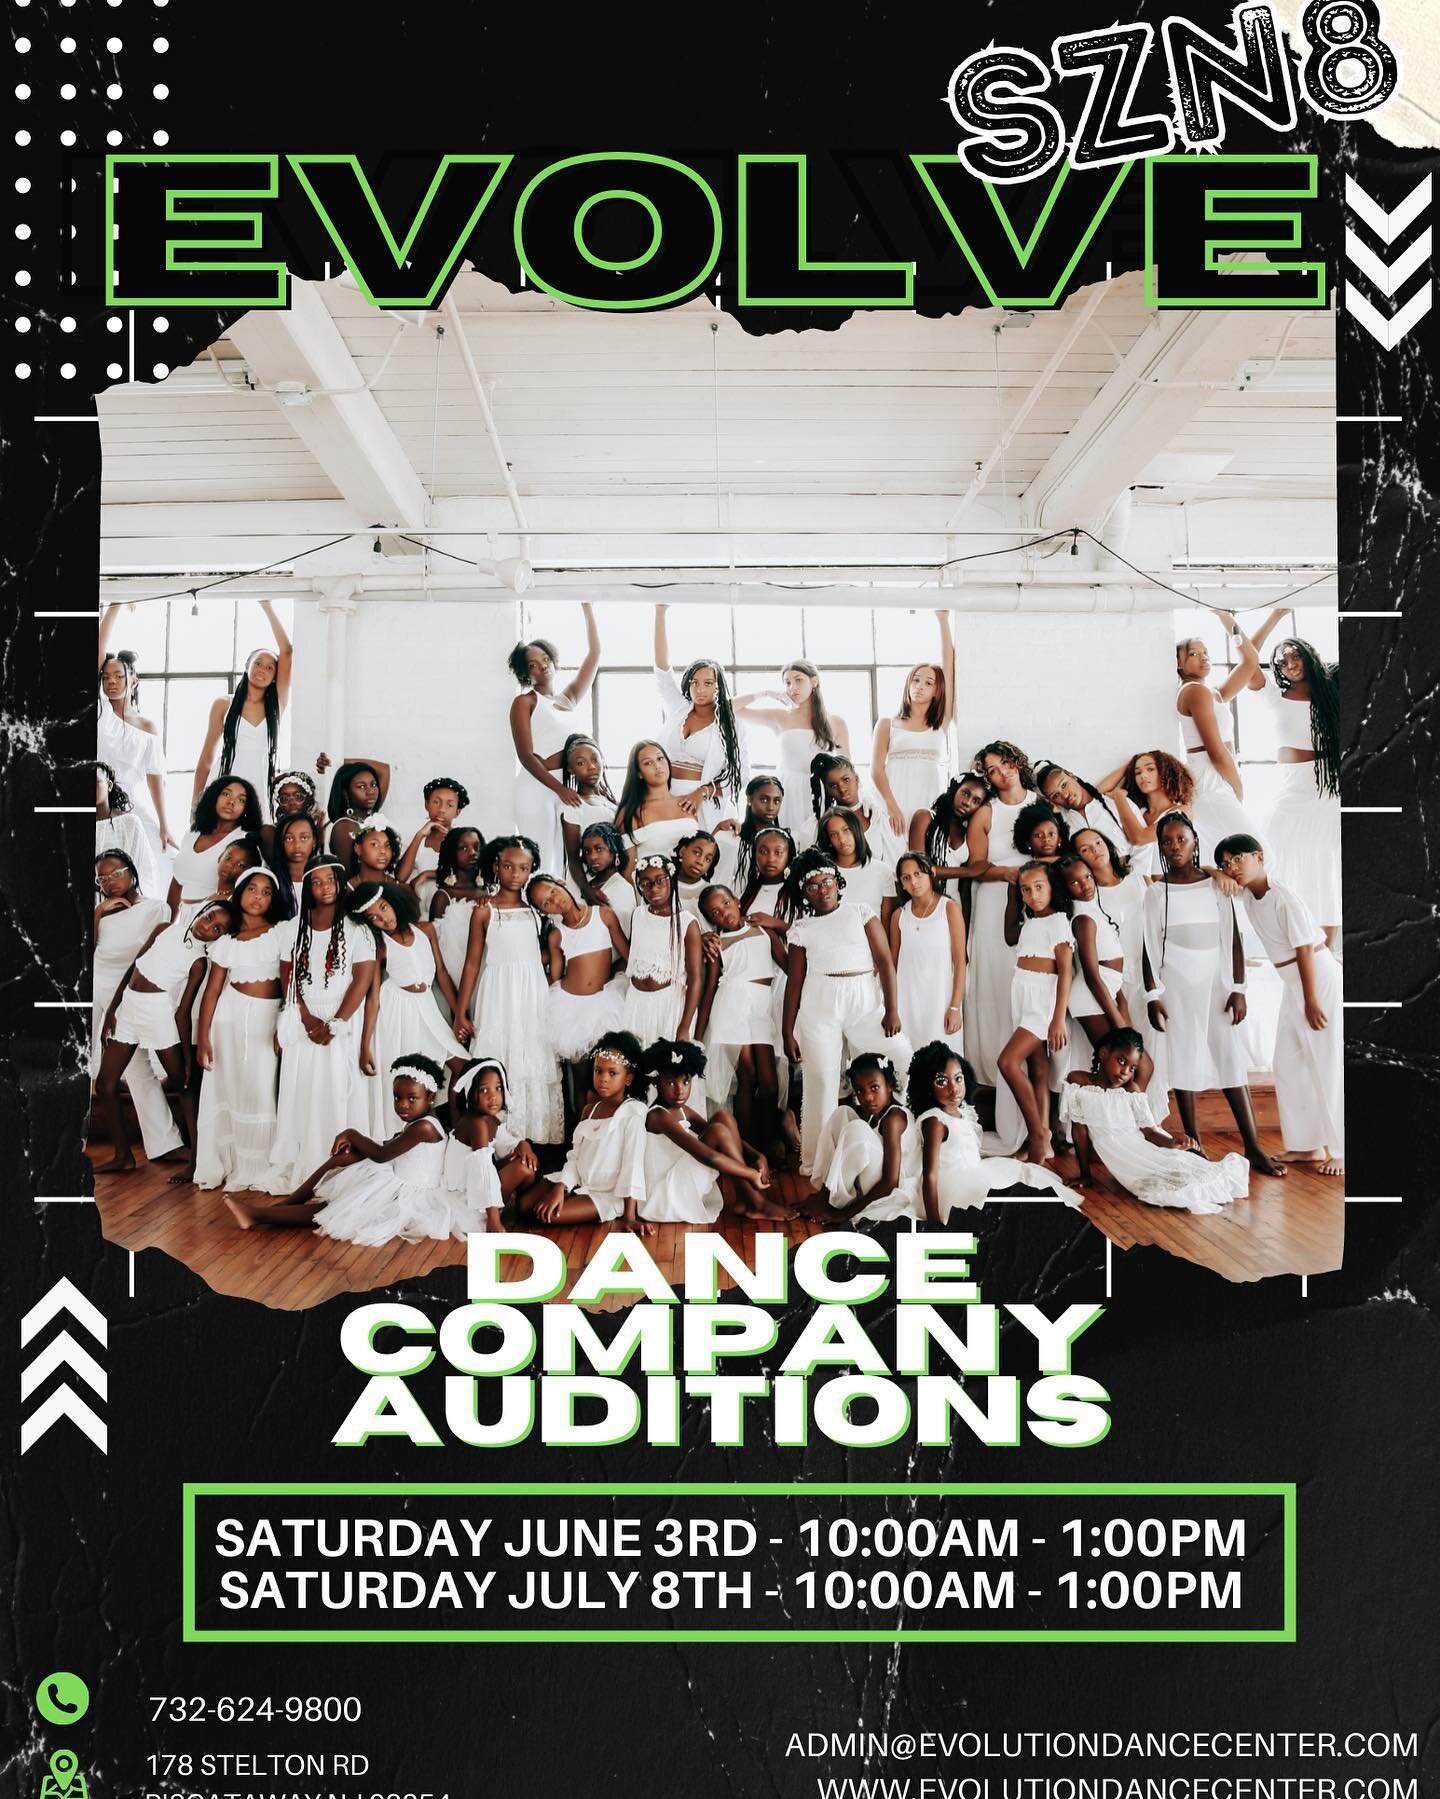 JOIN US THIS SATURDAY at our first round of auditions for our Nationally Ranked, Award Winning EVOLVE DANCE COMPANY!! Become a part of our amazing, supportive dance family while receiving top tier dance training and performing stunning choreography! 